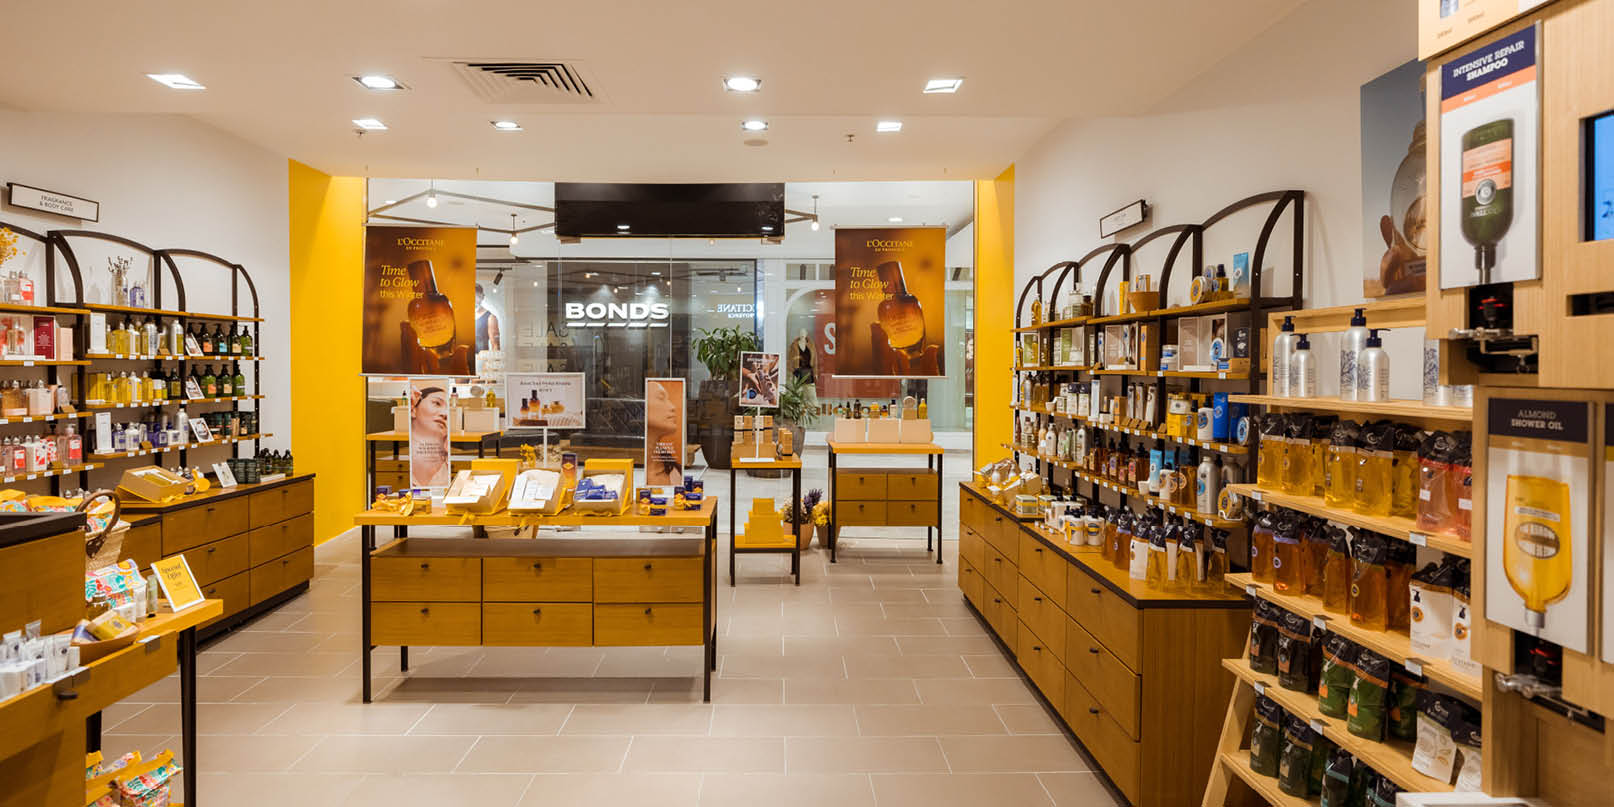 L'OCCITANE en Provence launches a sustainable 12 month pop-up